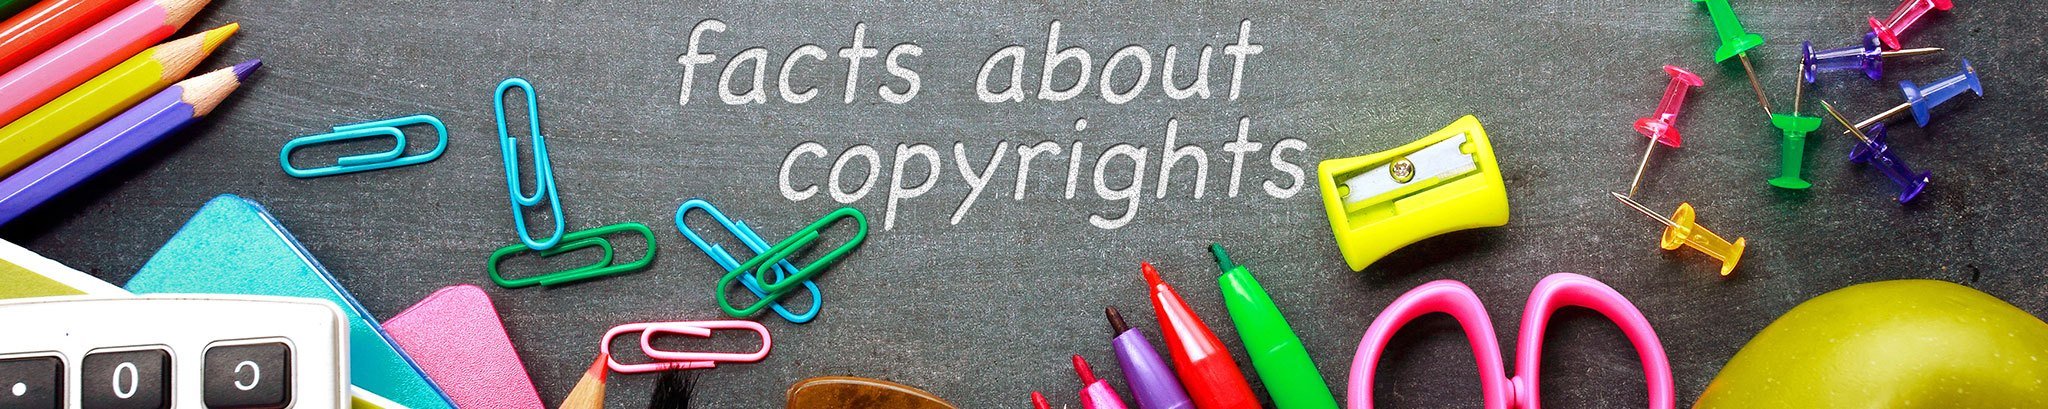 Classrooms resources needed to learn about Copyright